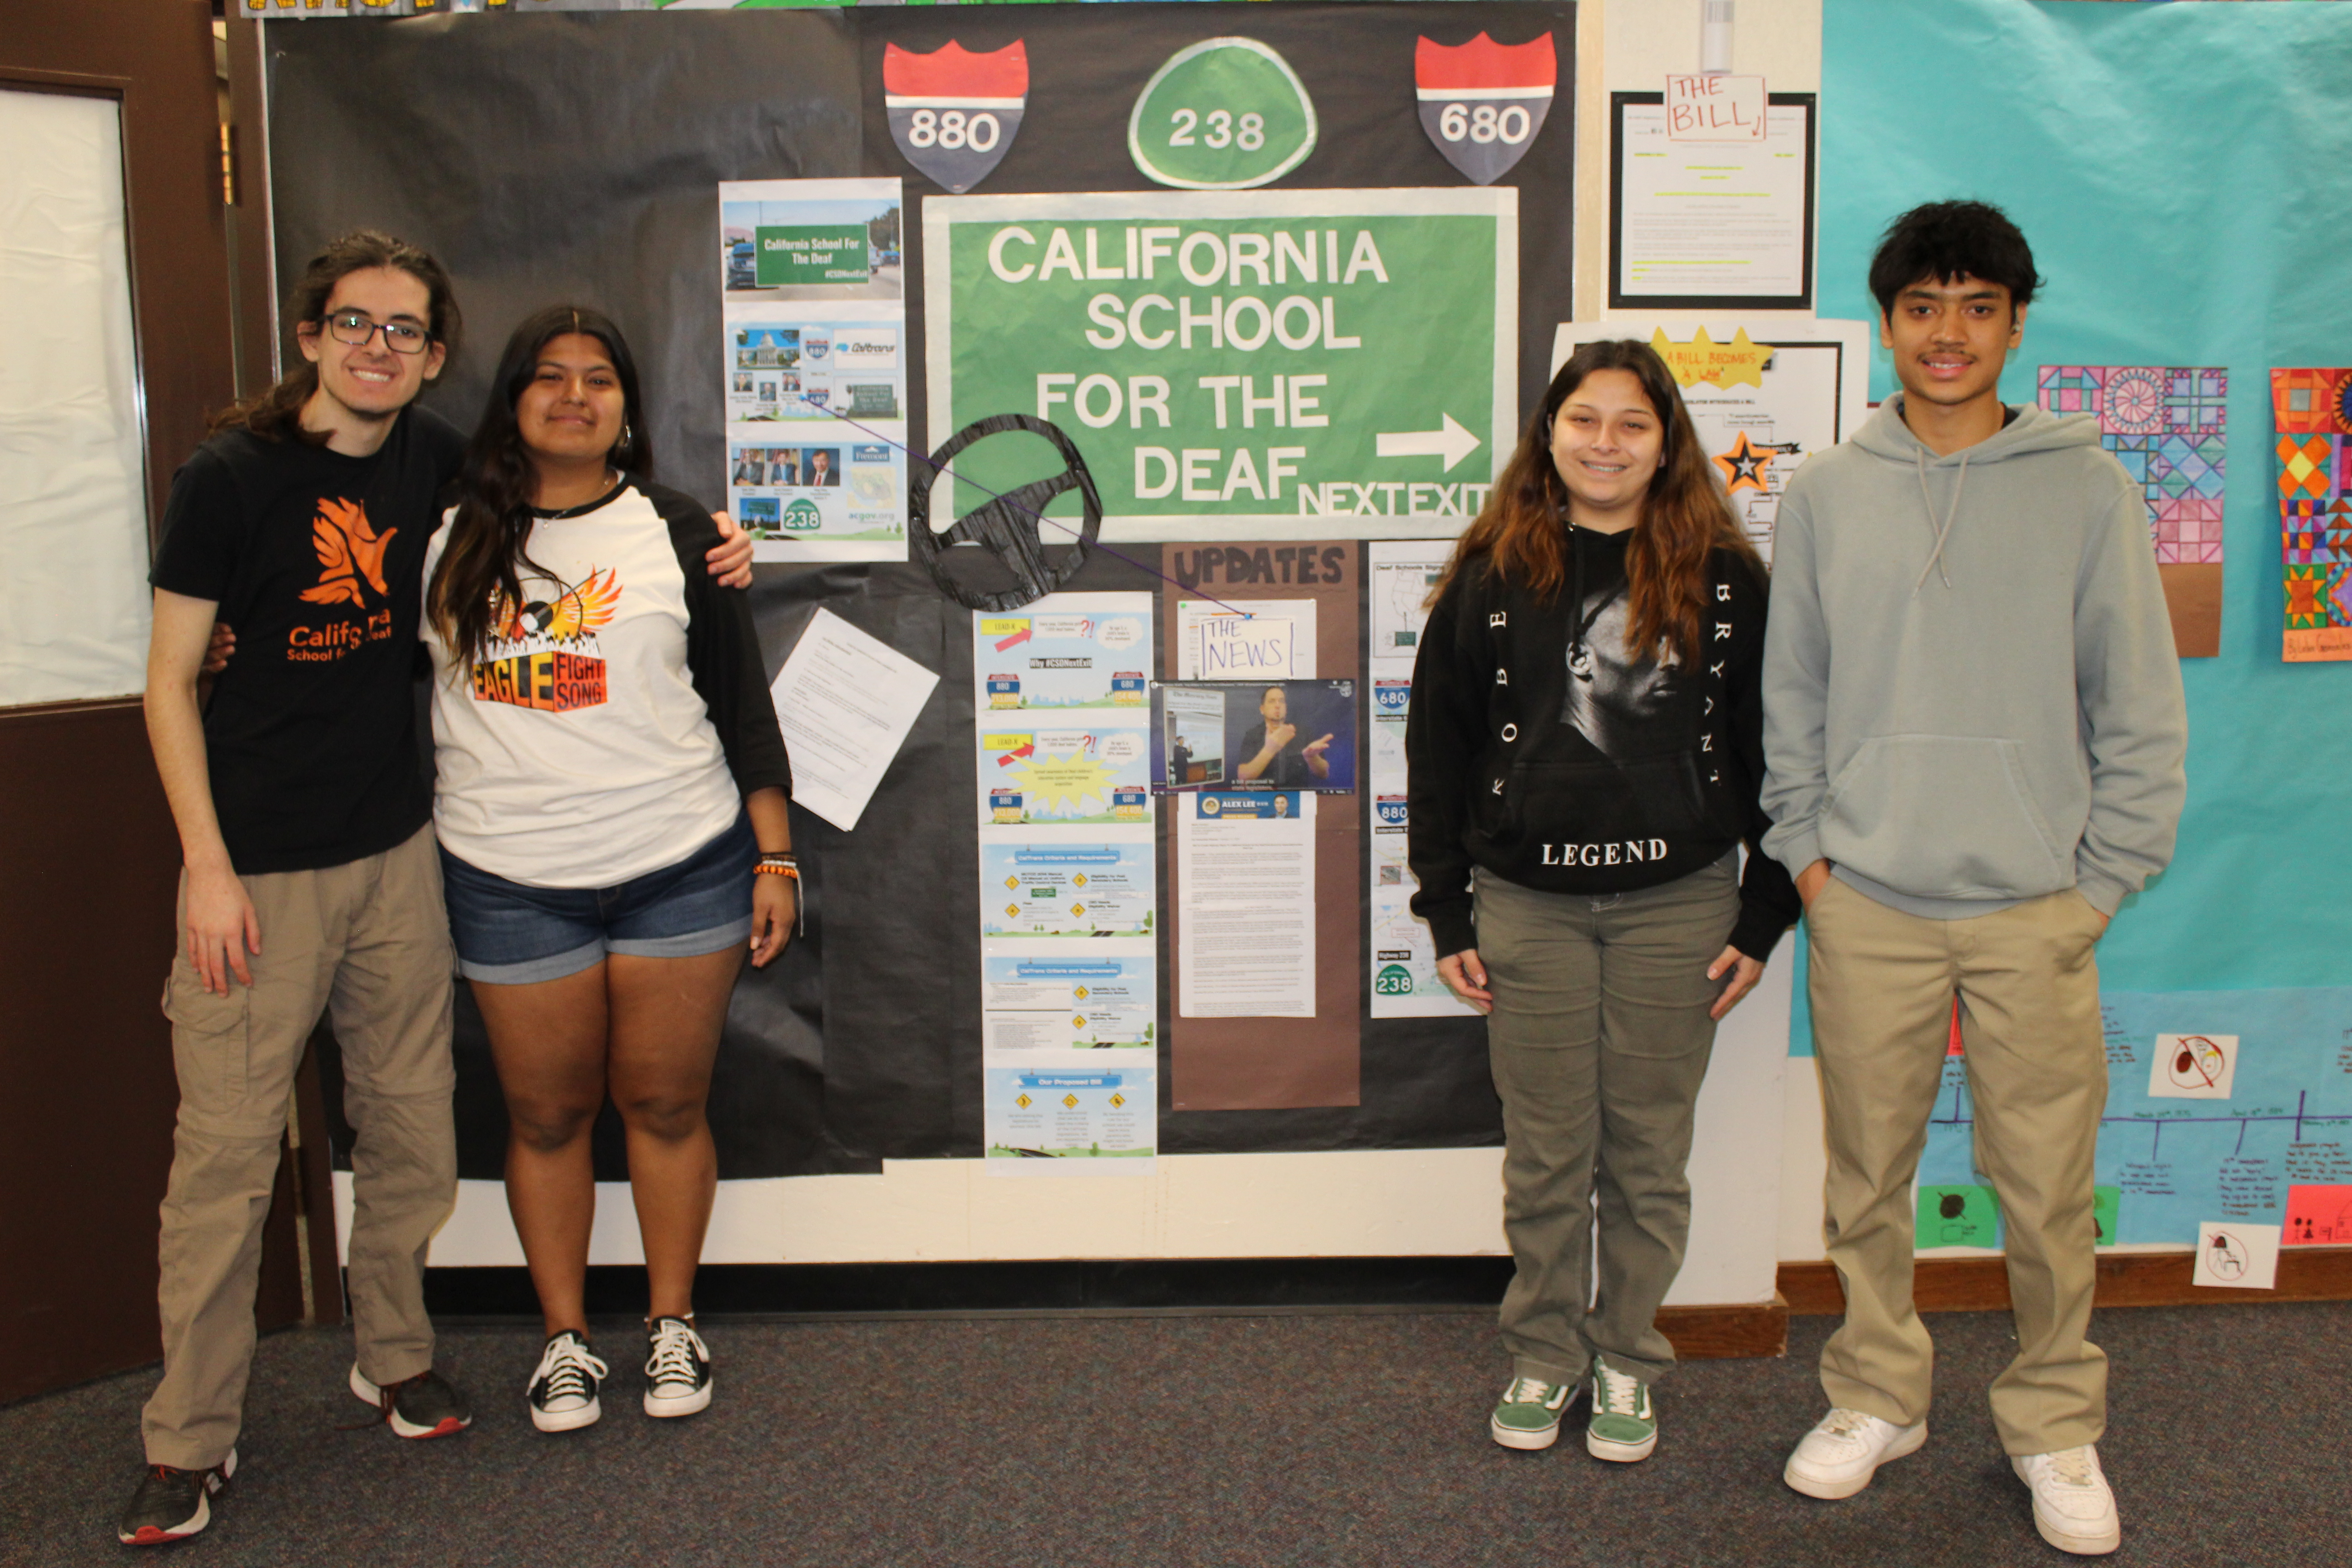 Students lead charge to increase visibility for California School for the Deaf